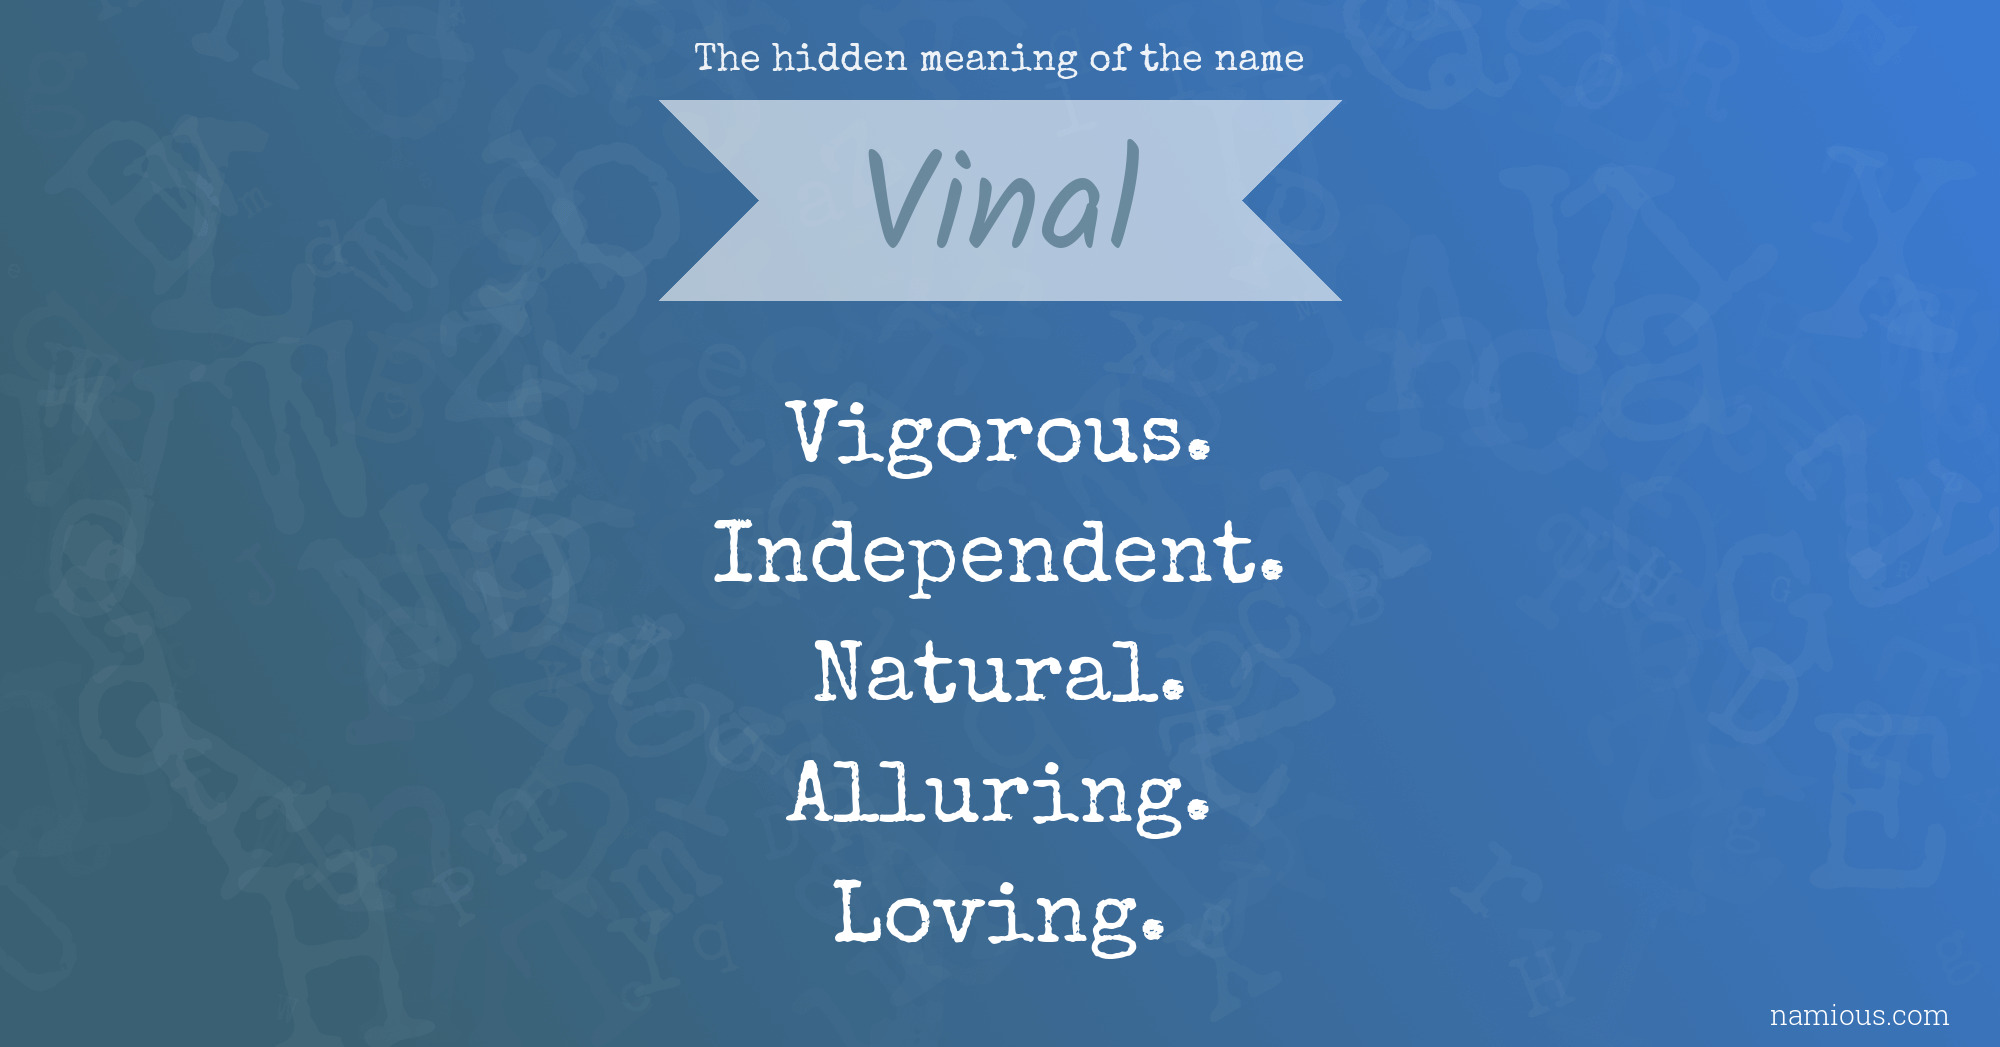 The hidden meaning of the name Vinal